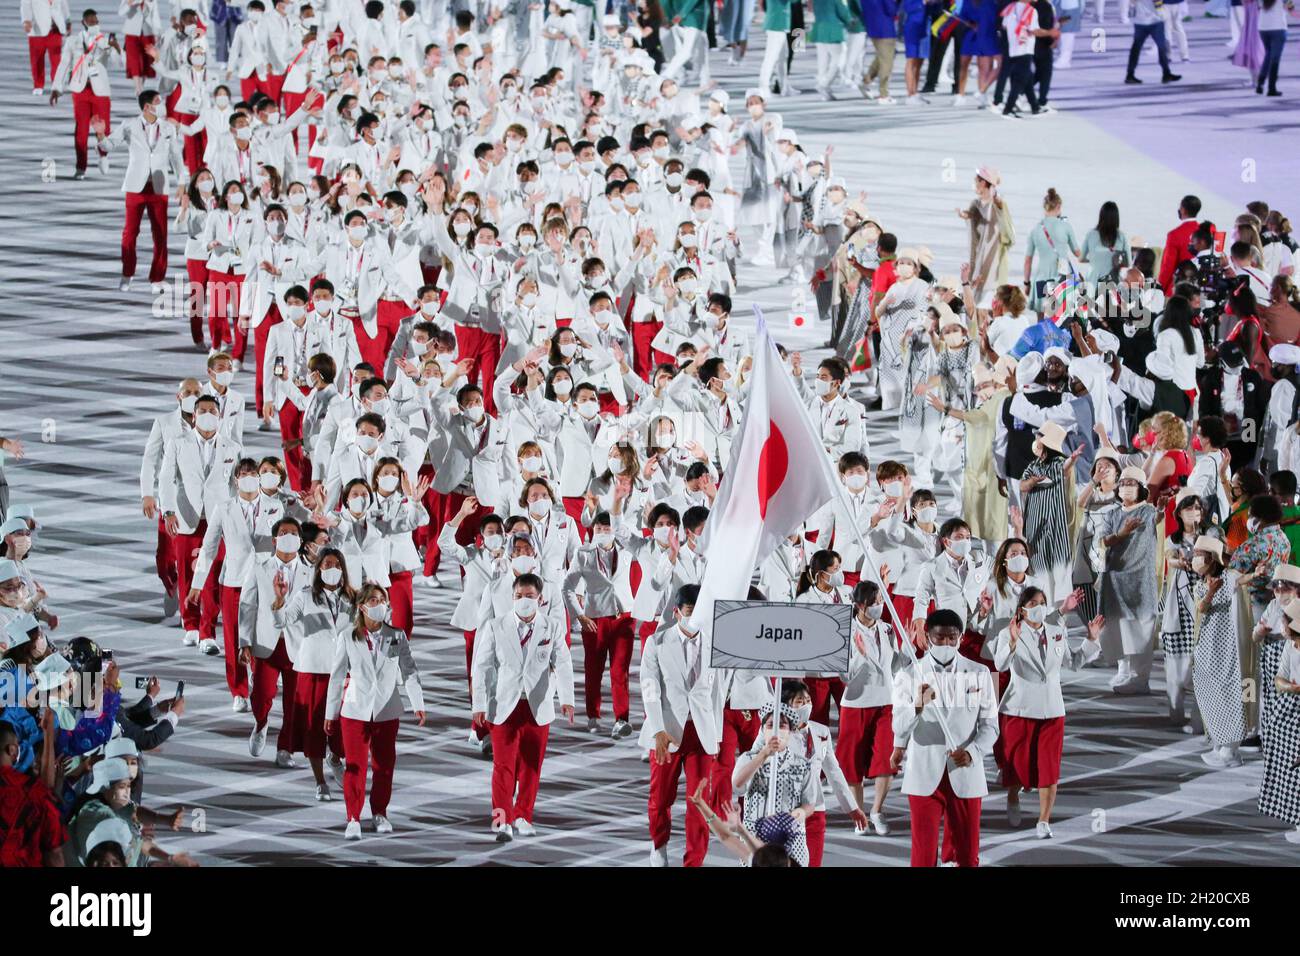 JULY 23rd, 2021 - TOKYO, JAPAN: Japan's flag bearers Yui Susaki and Rui Hachimura enter the Olympic Stadium with their delegation during the Parade of Stock Photo